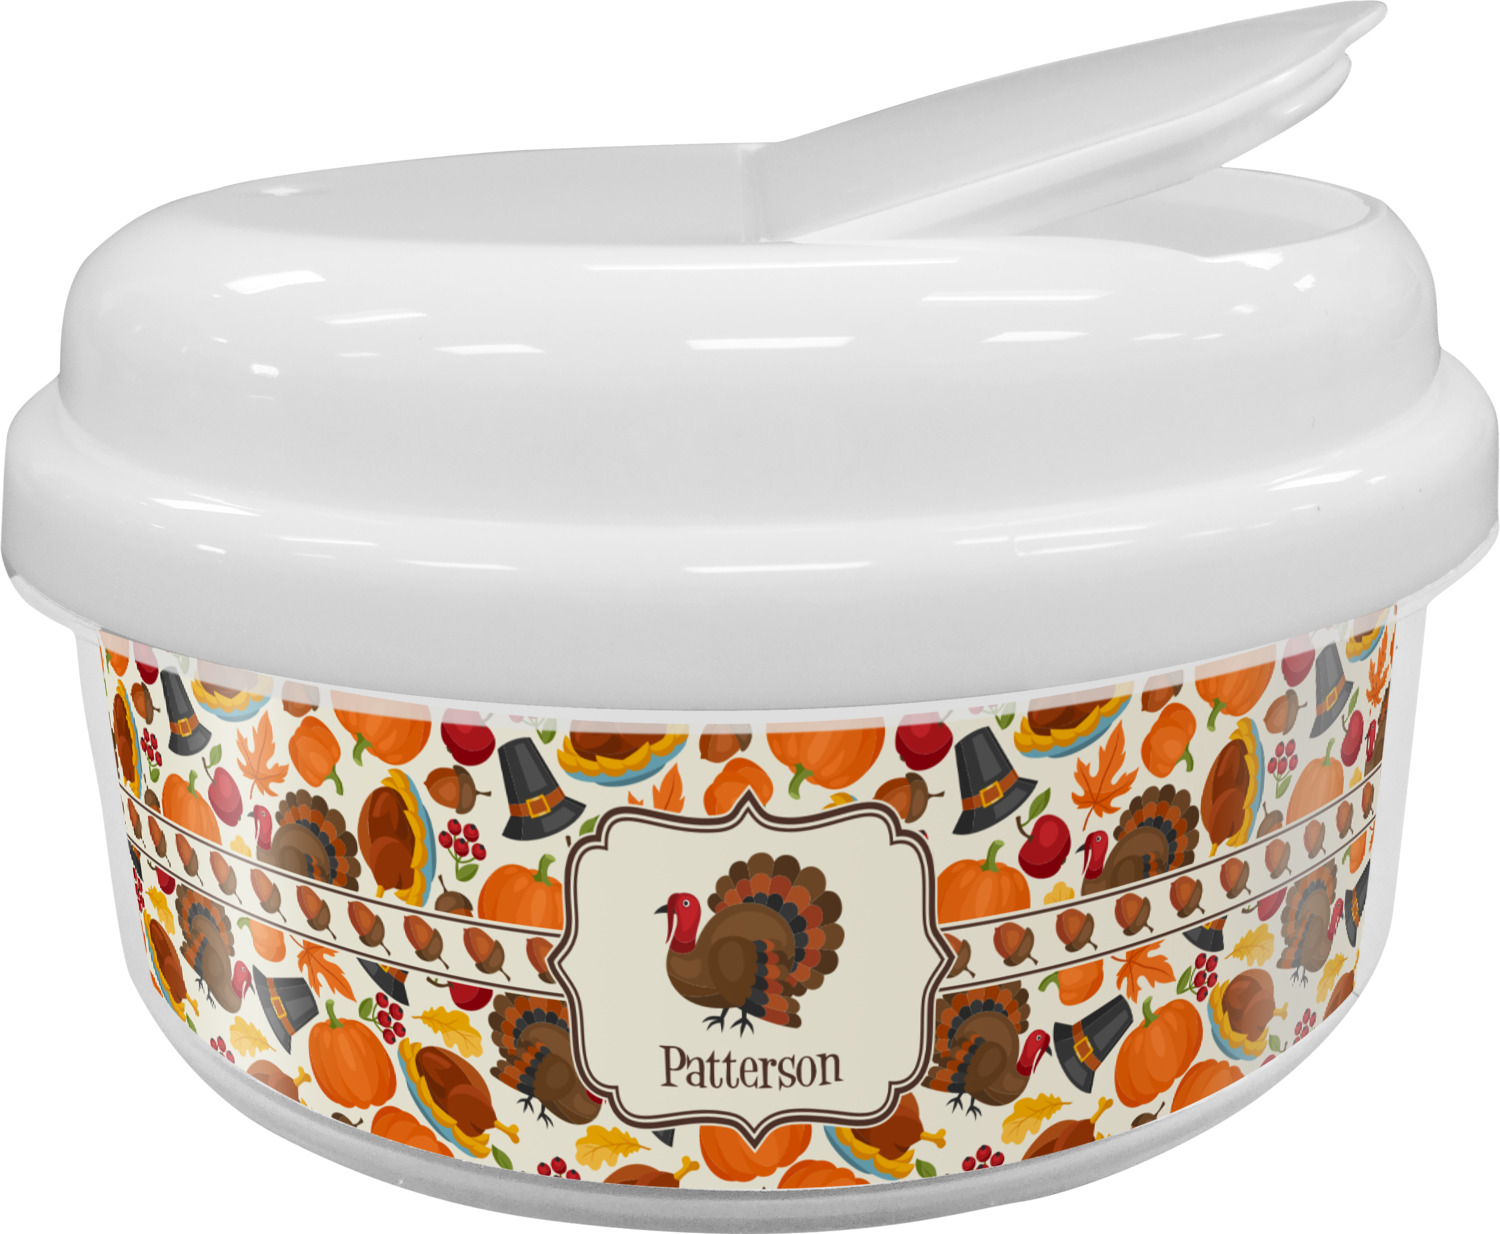 https://www.youcustomizeit.com/common/MAKE/513196/Traditional-Thanksgiving-Snack-Container-Personalized.jpg?lm=1659776848